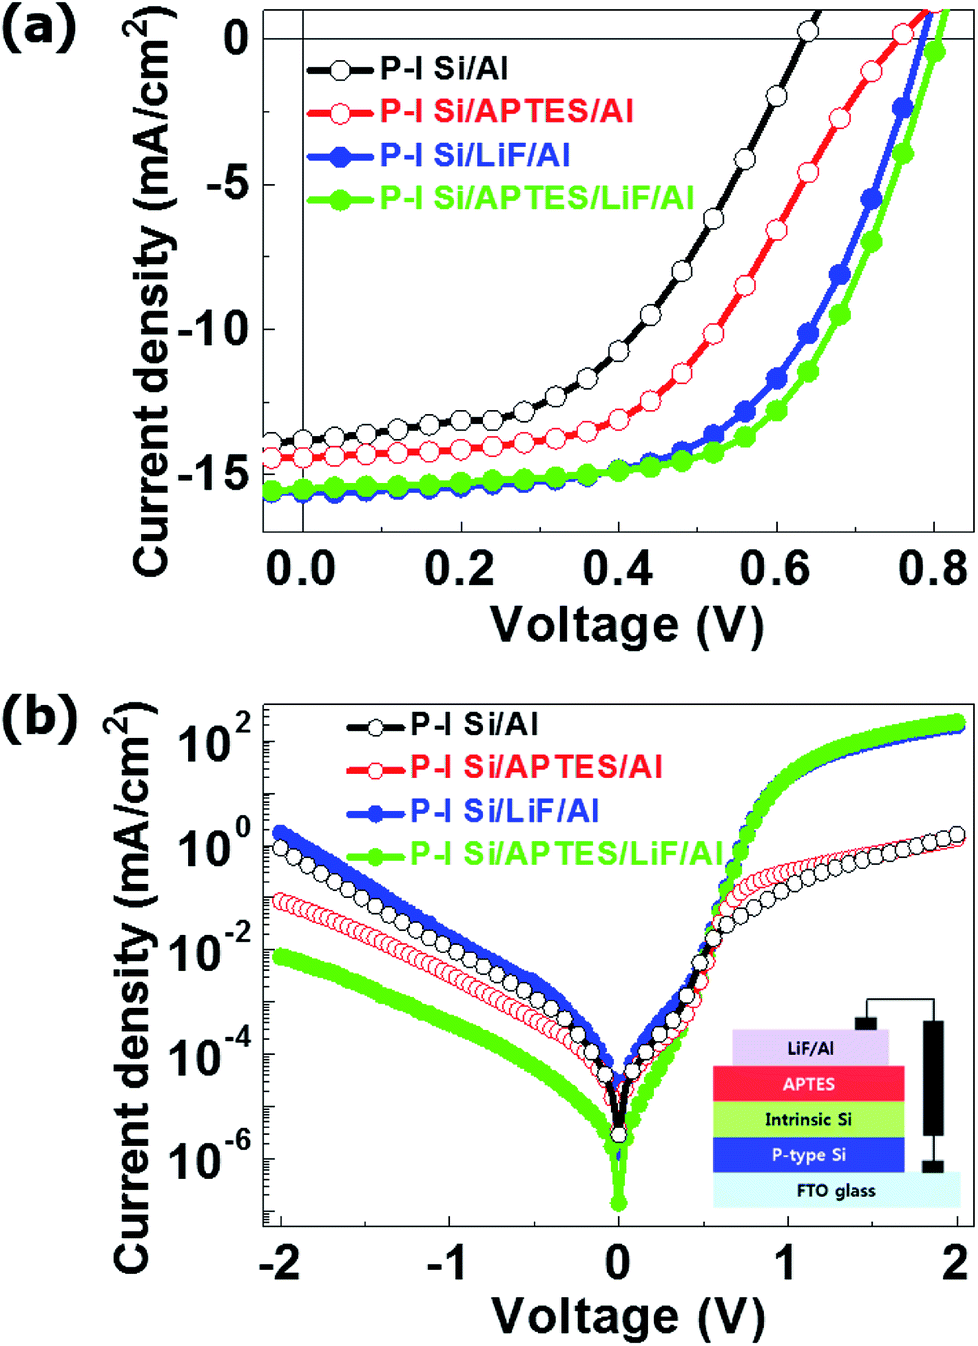 Replacement Of N Type Layers With A Non Toxic Aptes Interfacial Layer To Improve The Performance Of Amorphous Si Thin Film Solar Cells Rsc Advances Rsc Publishing Doi 10 1039 C8rag